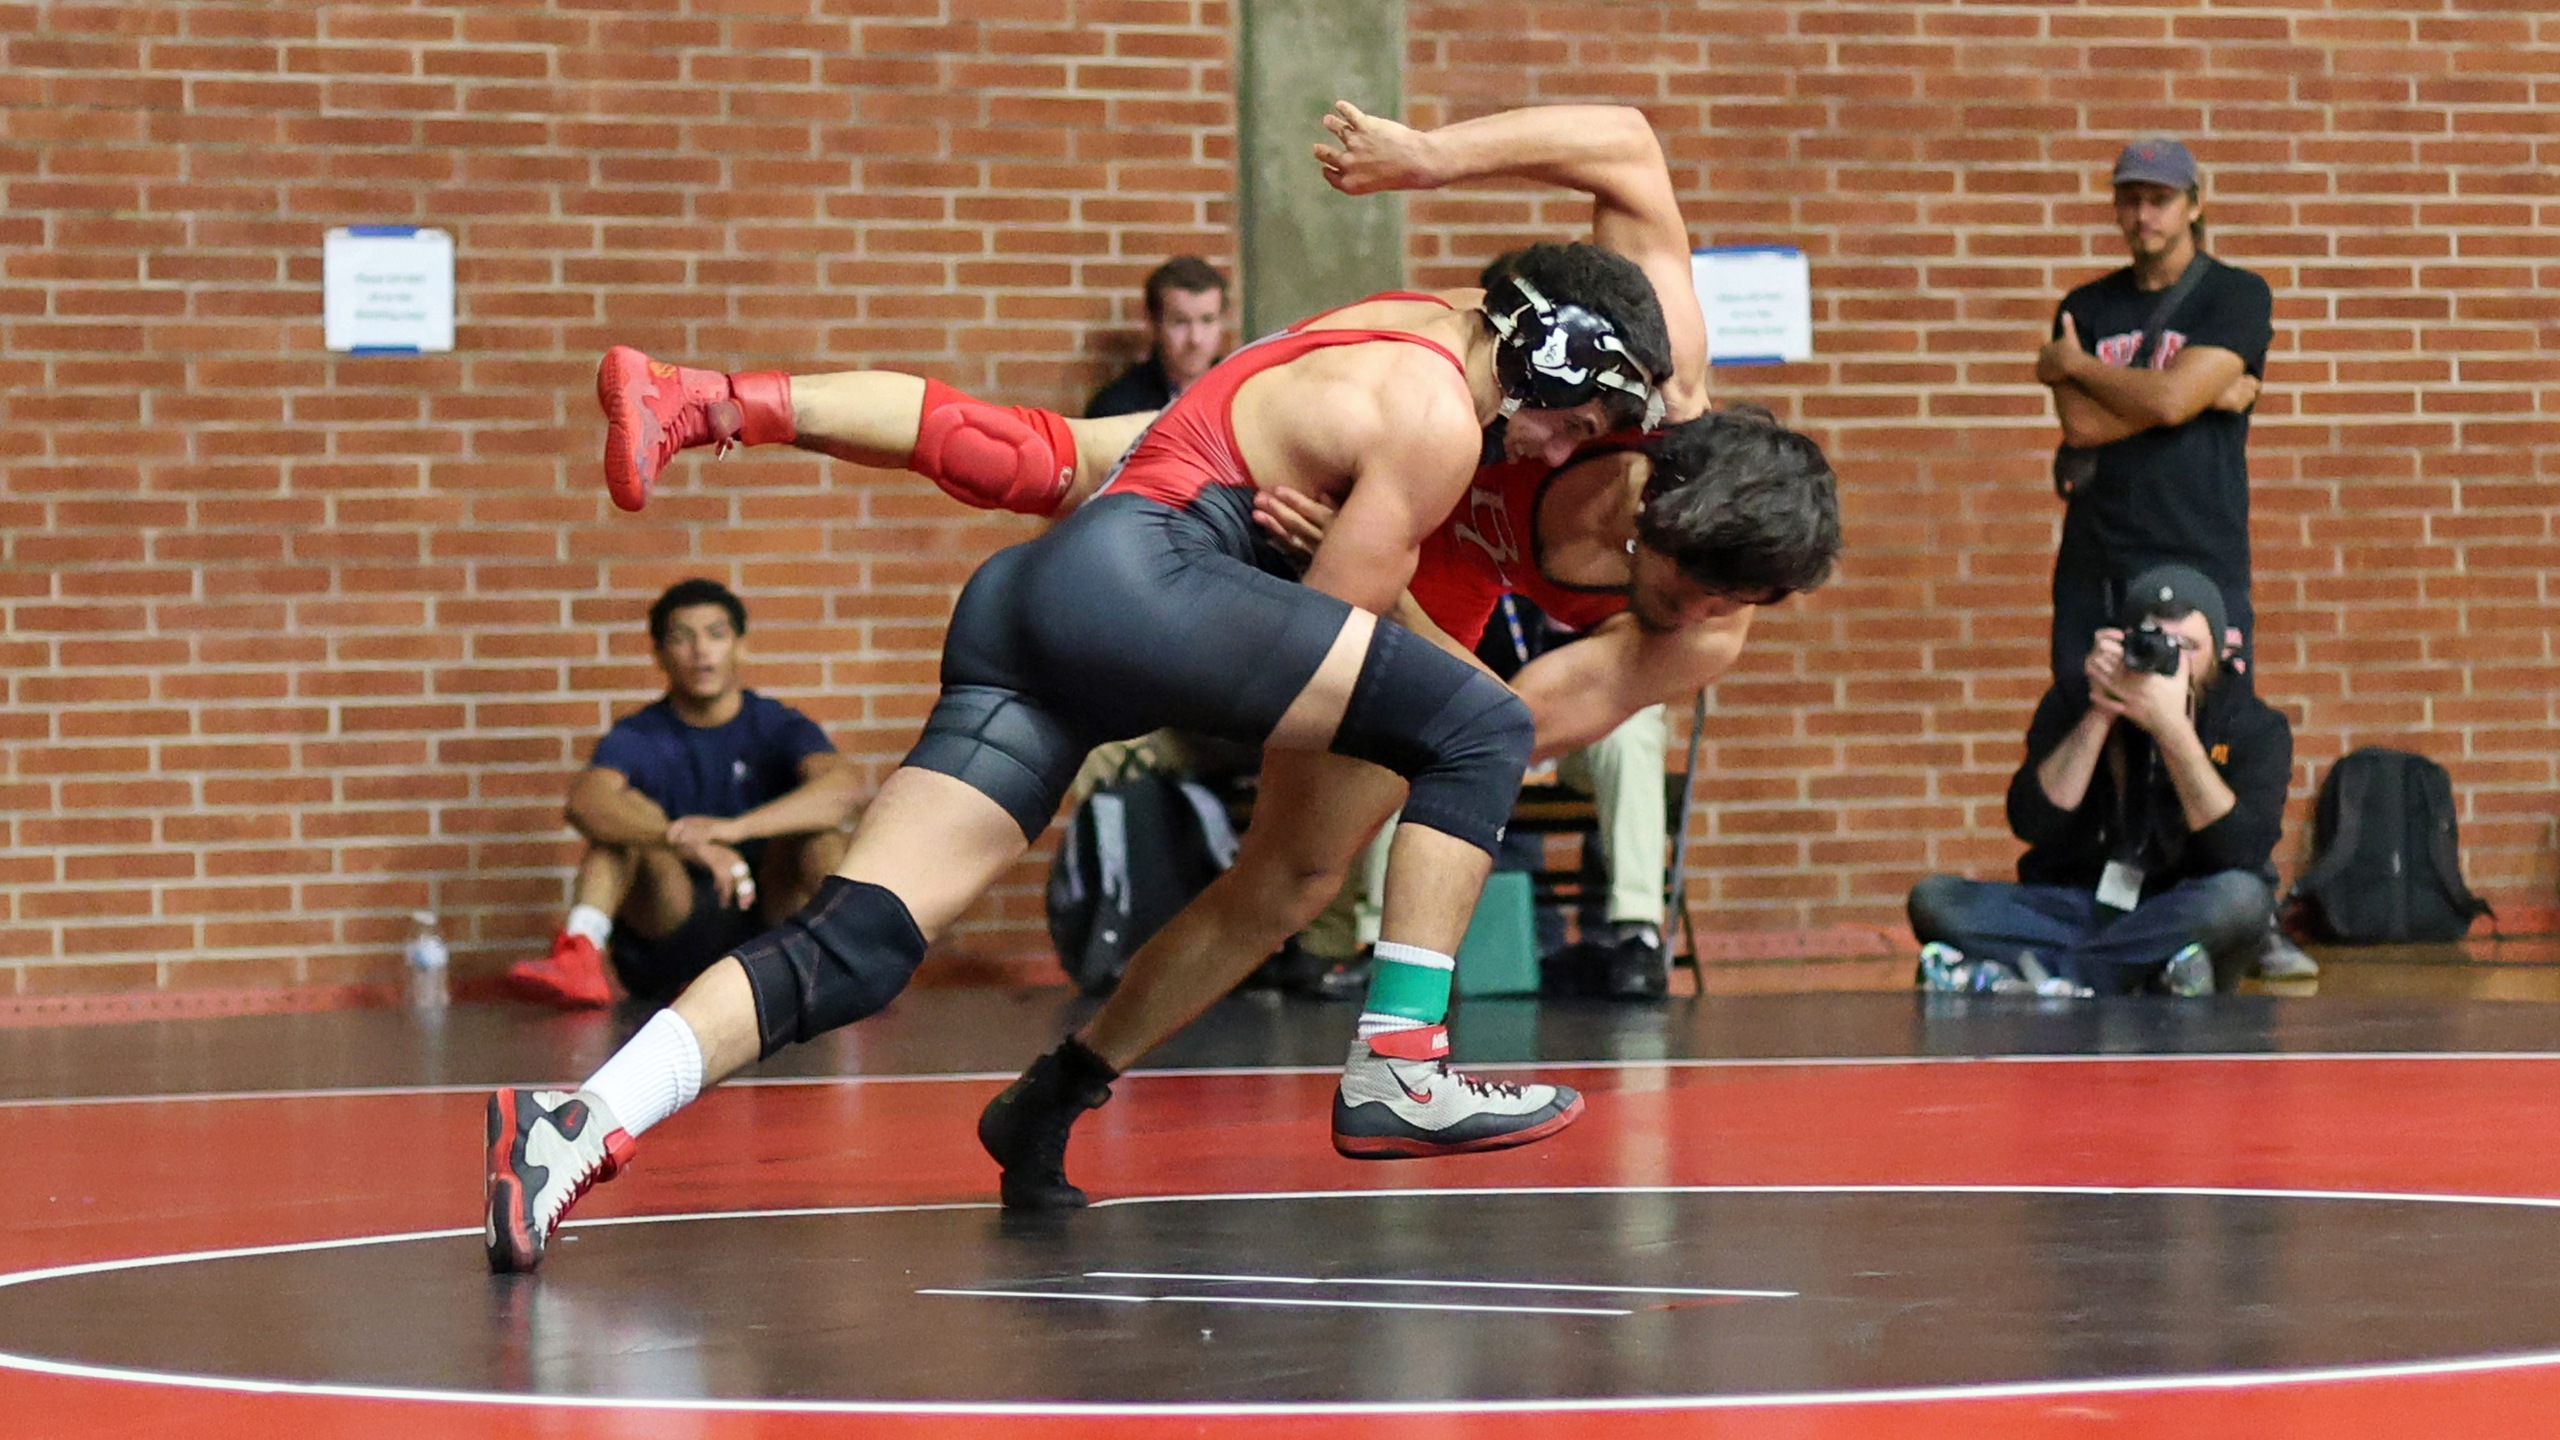 Anthony Perez was a third-place finisher and qualified for the state tournament. Photo by Hugh Cox.